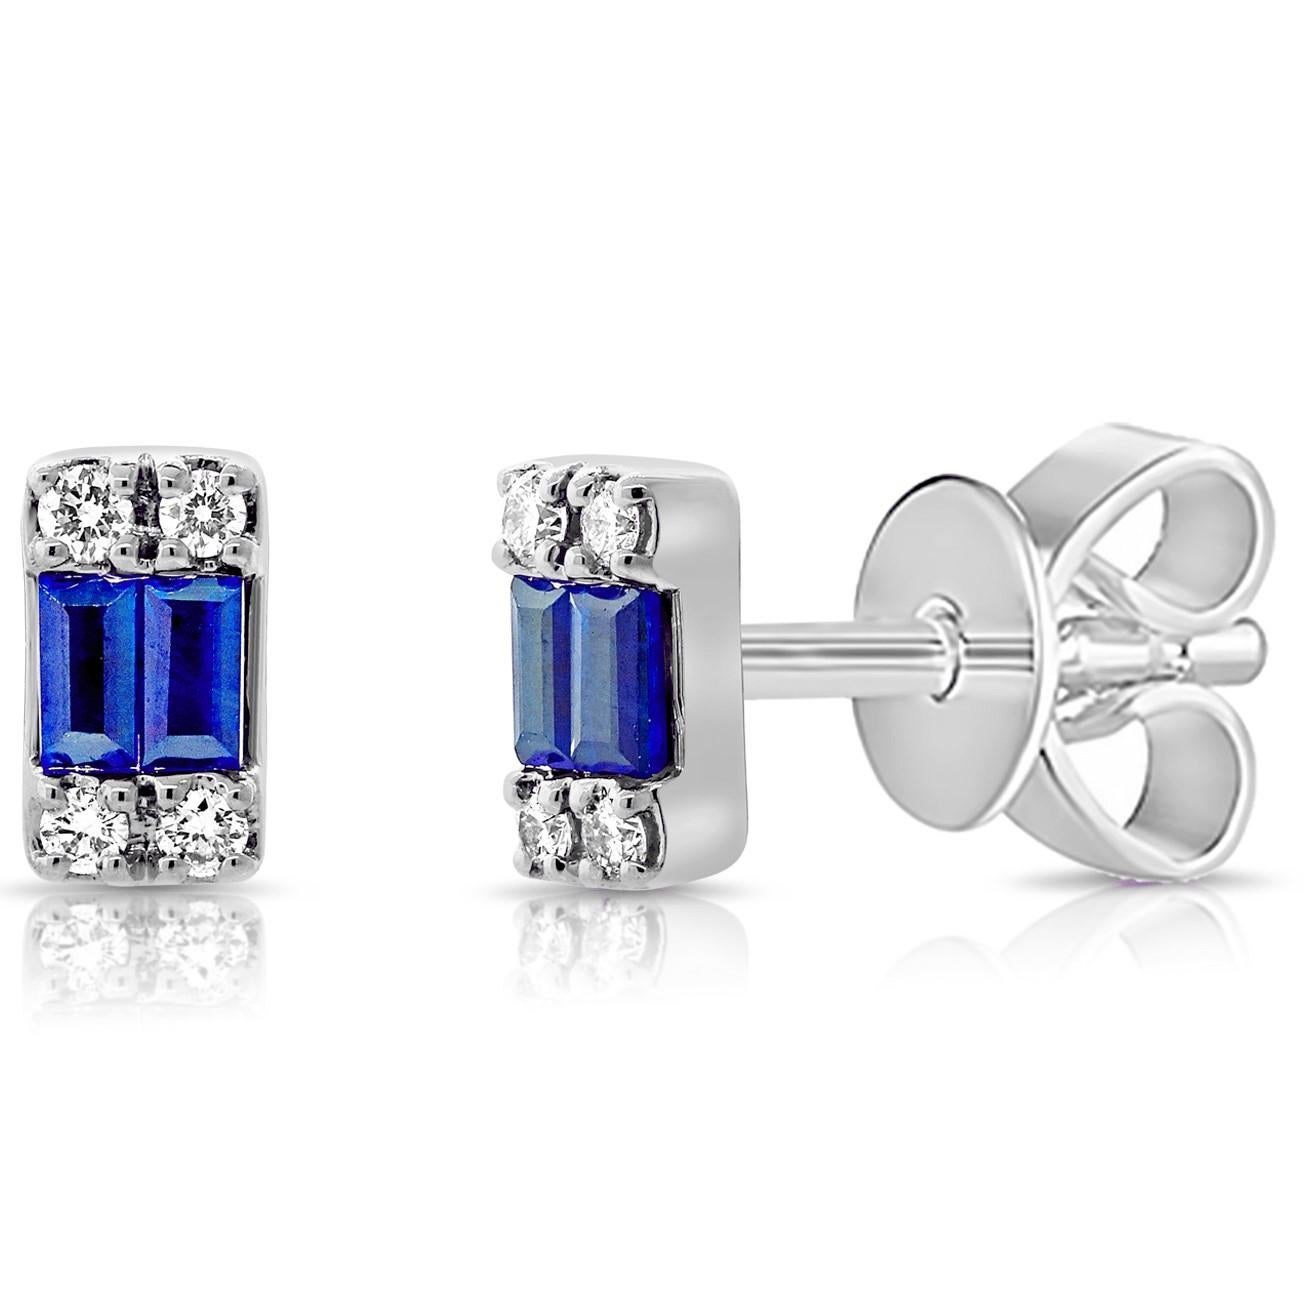 Contemporary 14K White Gold Diamond & Baguette Sapphire Tiny Stud Earrings for Her For Sale